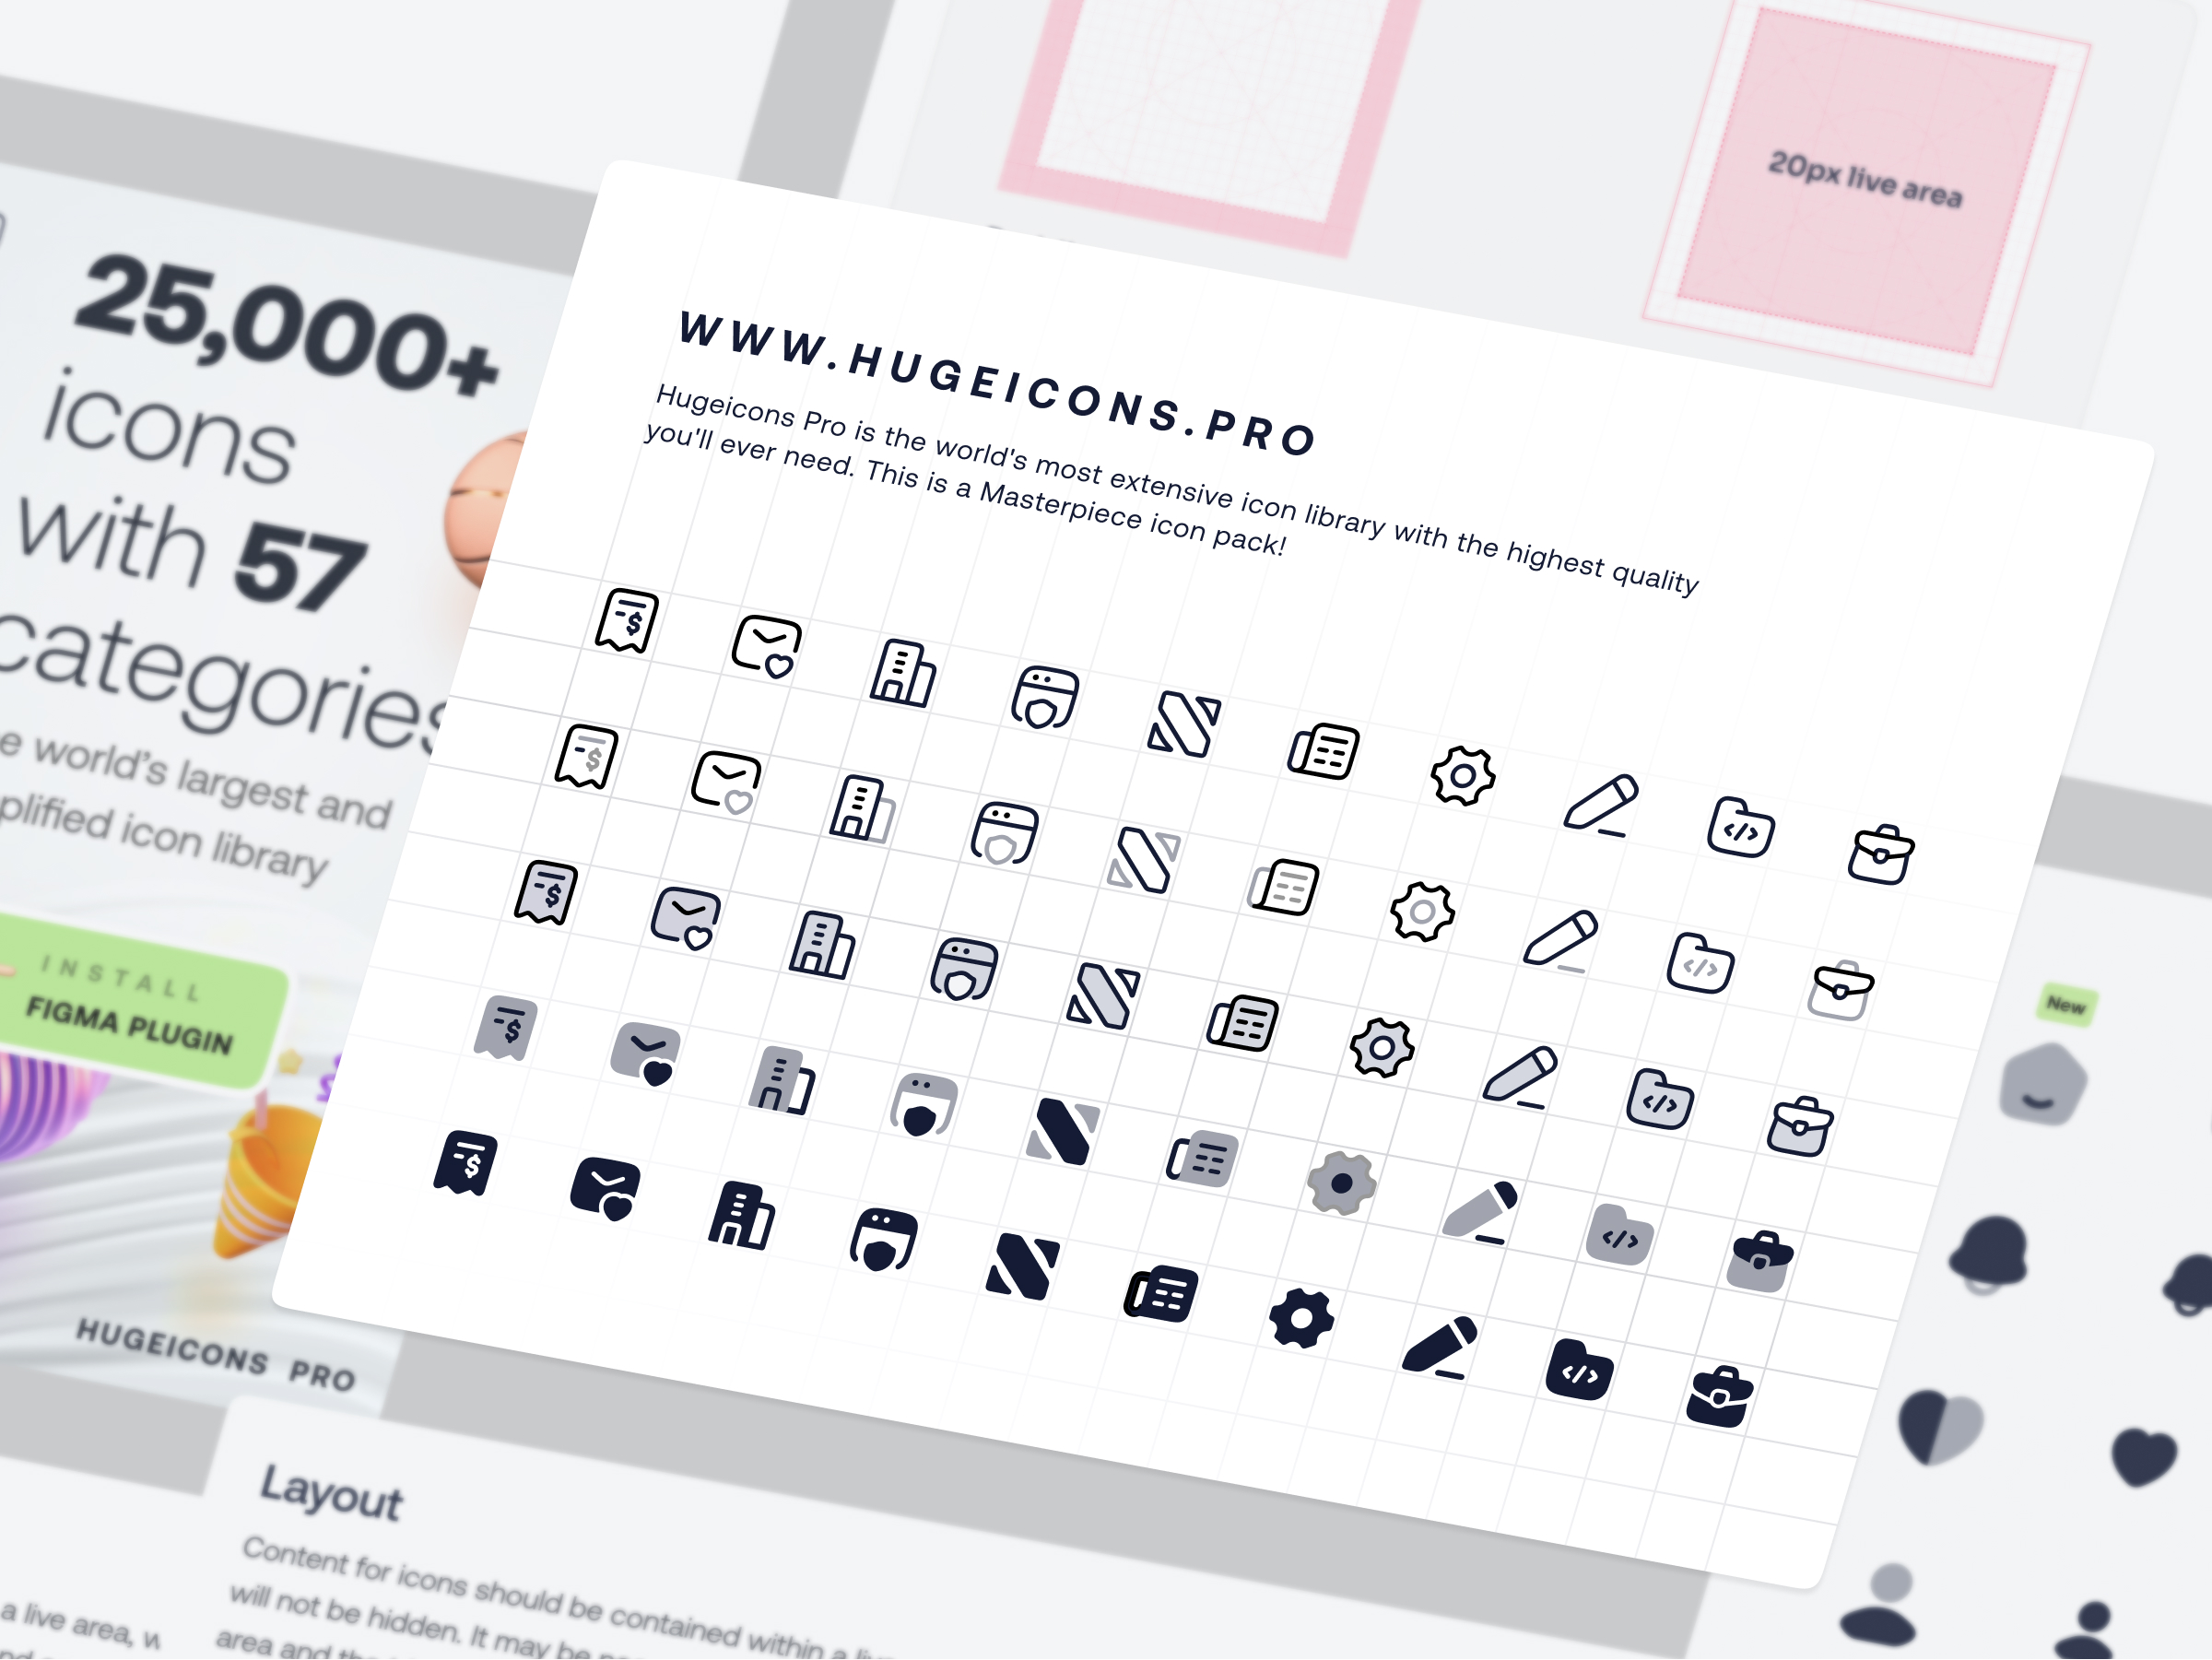 Categories - Free ui icons